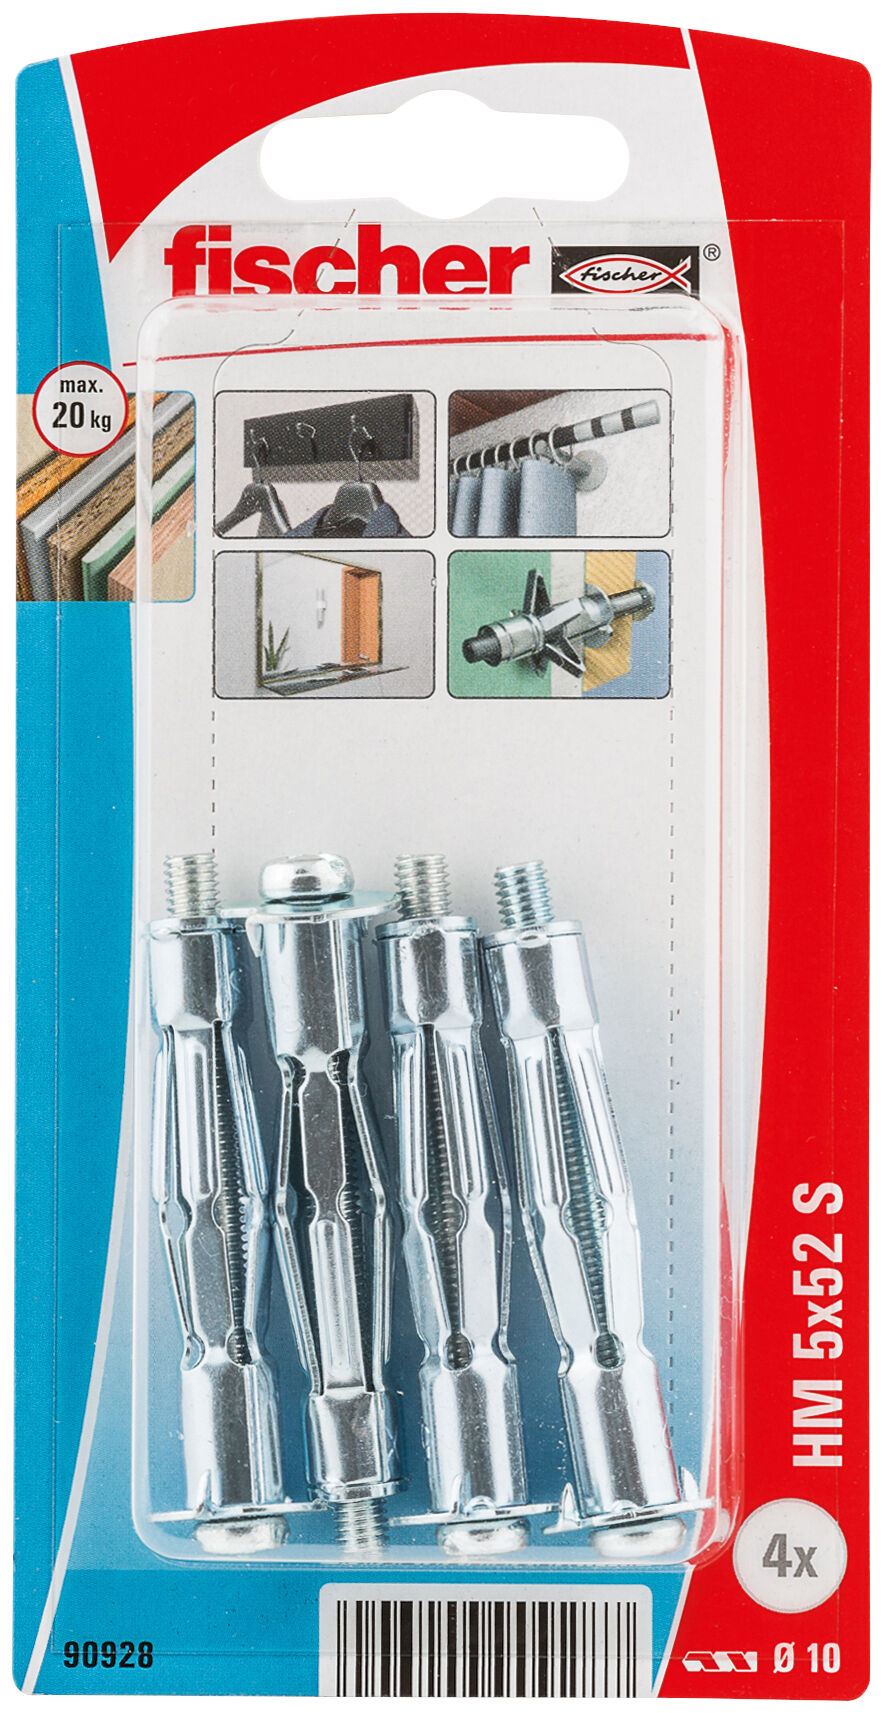 fischer HM 5 x 52 S-Cavity Metal Dowels with Screws for Attaching Pictures Curtain Rails in Panel Building Materials-Pack of 50-Item No Silver 519774 